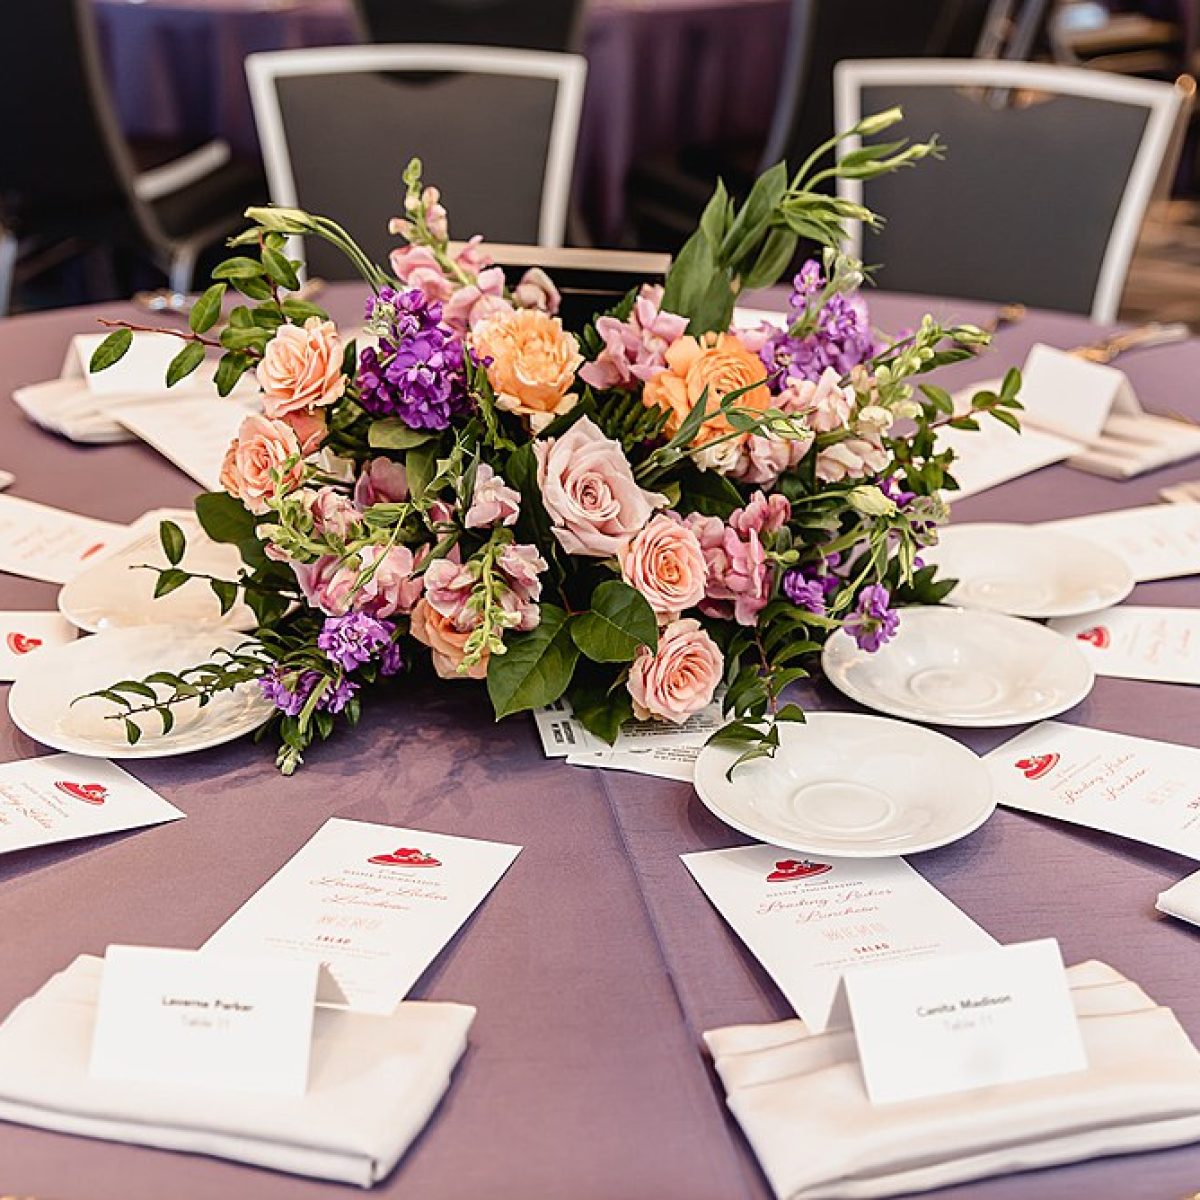 On Sunday, April 28, 2019, the Swissotel Chicago will welcome leading ladies  to the Daisie Foundation’s annual Kentucky Derby themed luncheon.